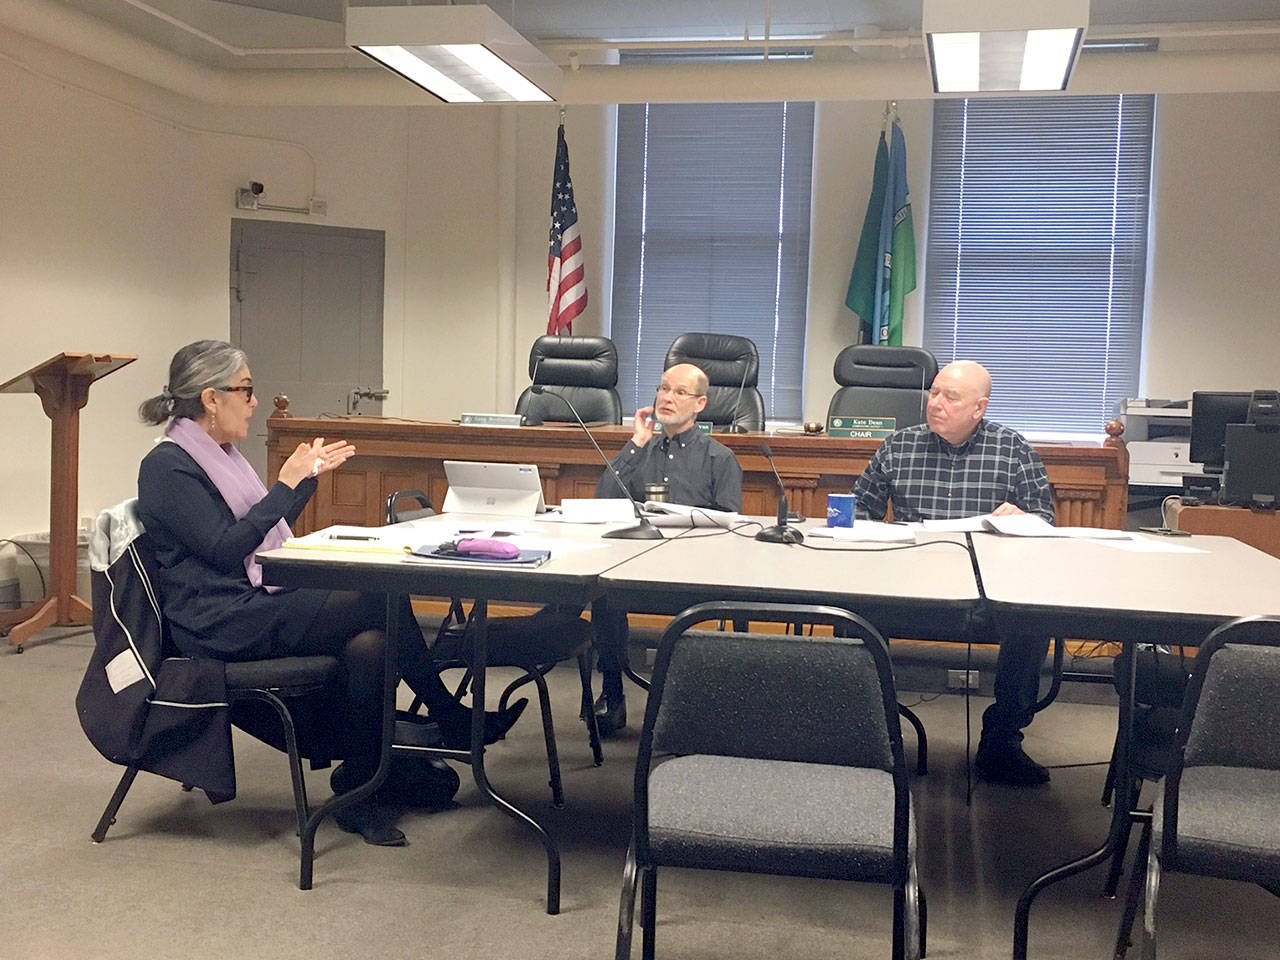 Port Townsend City Council member Michelle Sandoval, left, Jefferson County Administrator Philip Morley, center, and Jefferson County Commissioner David Sullivan, right, discuss housing issues in the first meeting of the Joint Oversight Board on Affordable Housing and Homeless Housing on Wednesday. Sandoval and Sullivan are serving on the board, which will eventually be expanded to five members. (Rob Ollikainen/Peninsula Daily News)